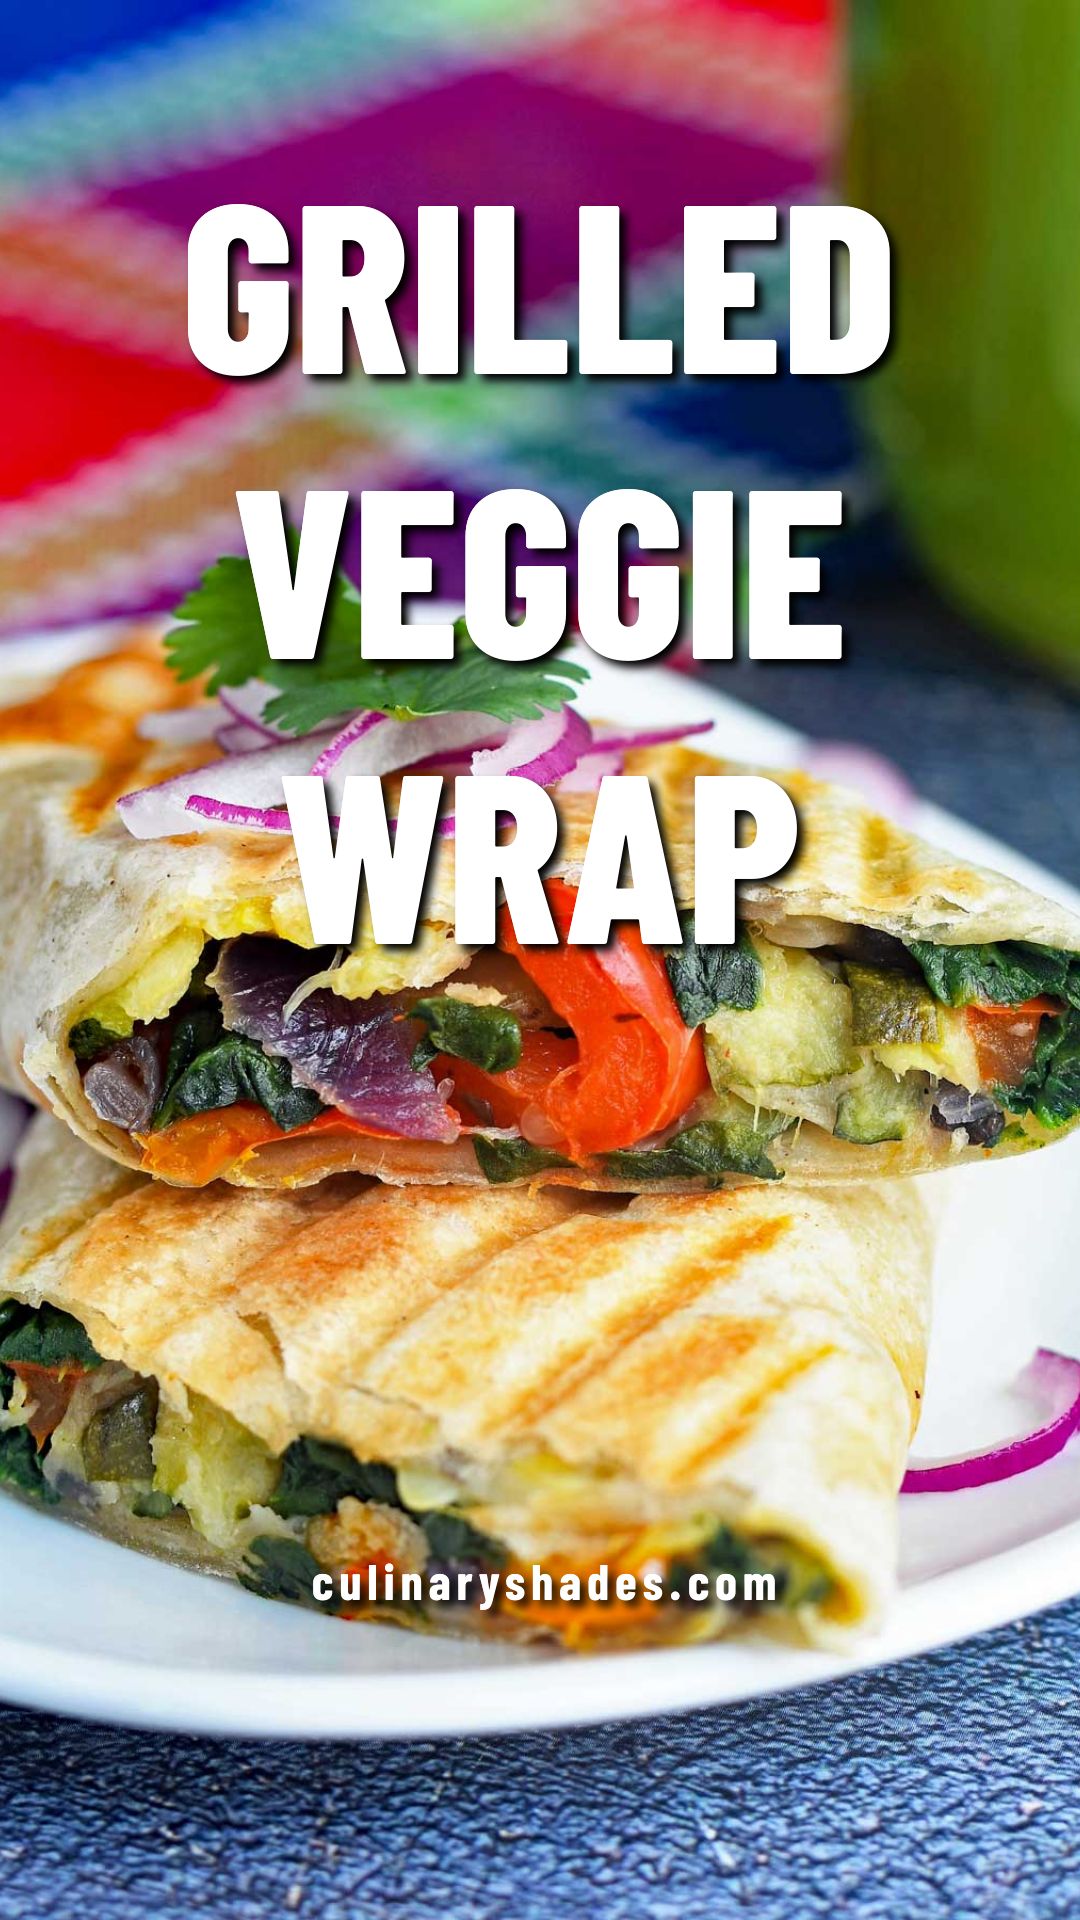 Grilled veggie wrap served in a plate.